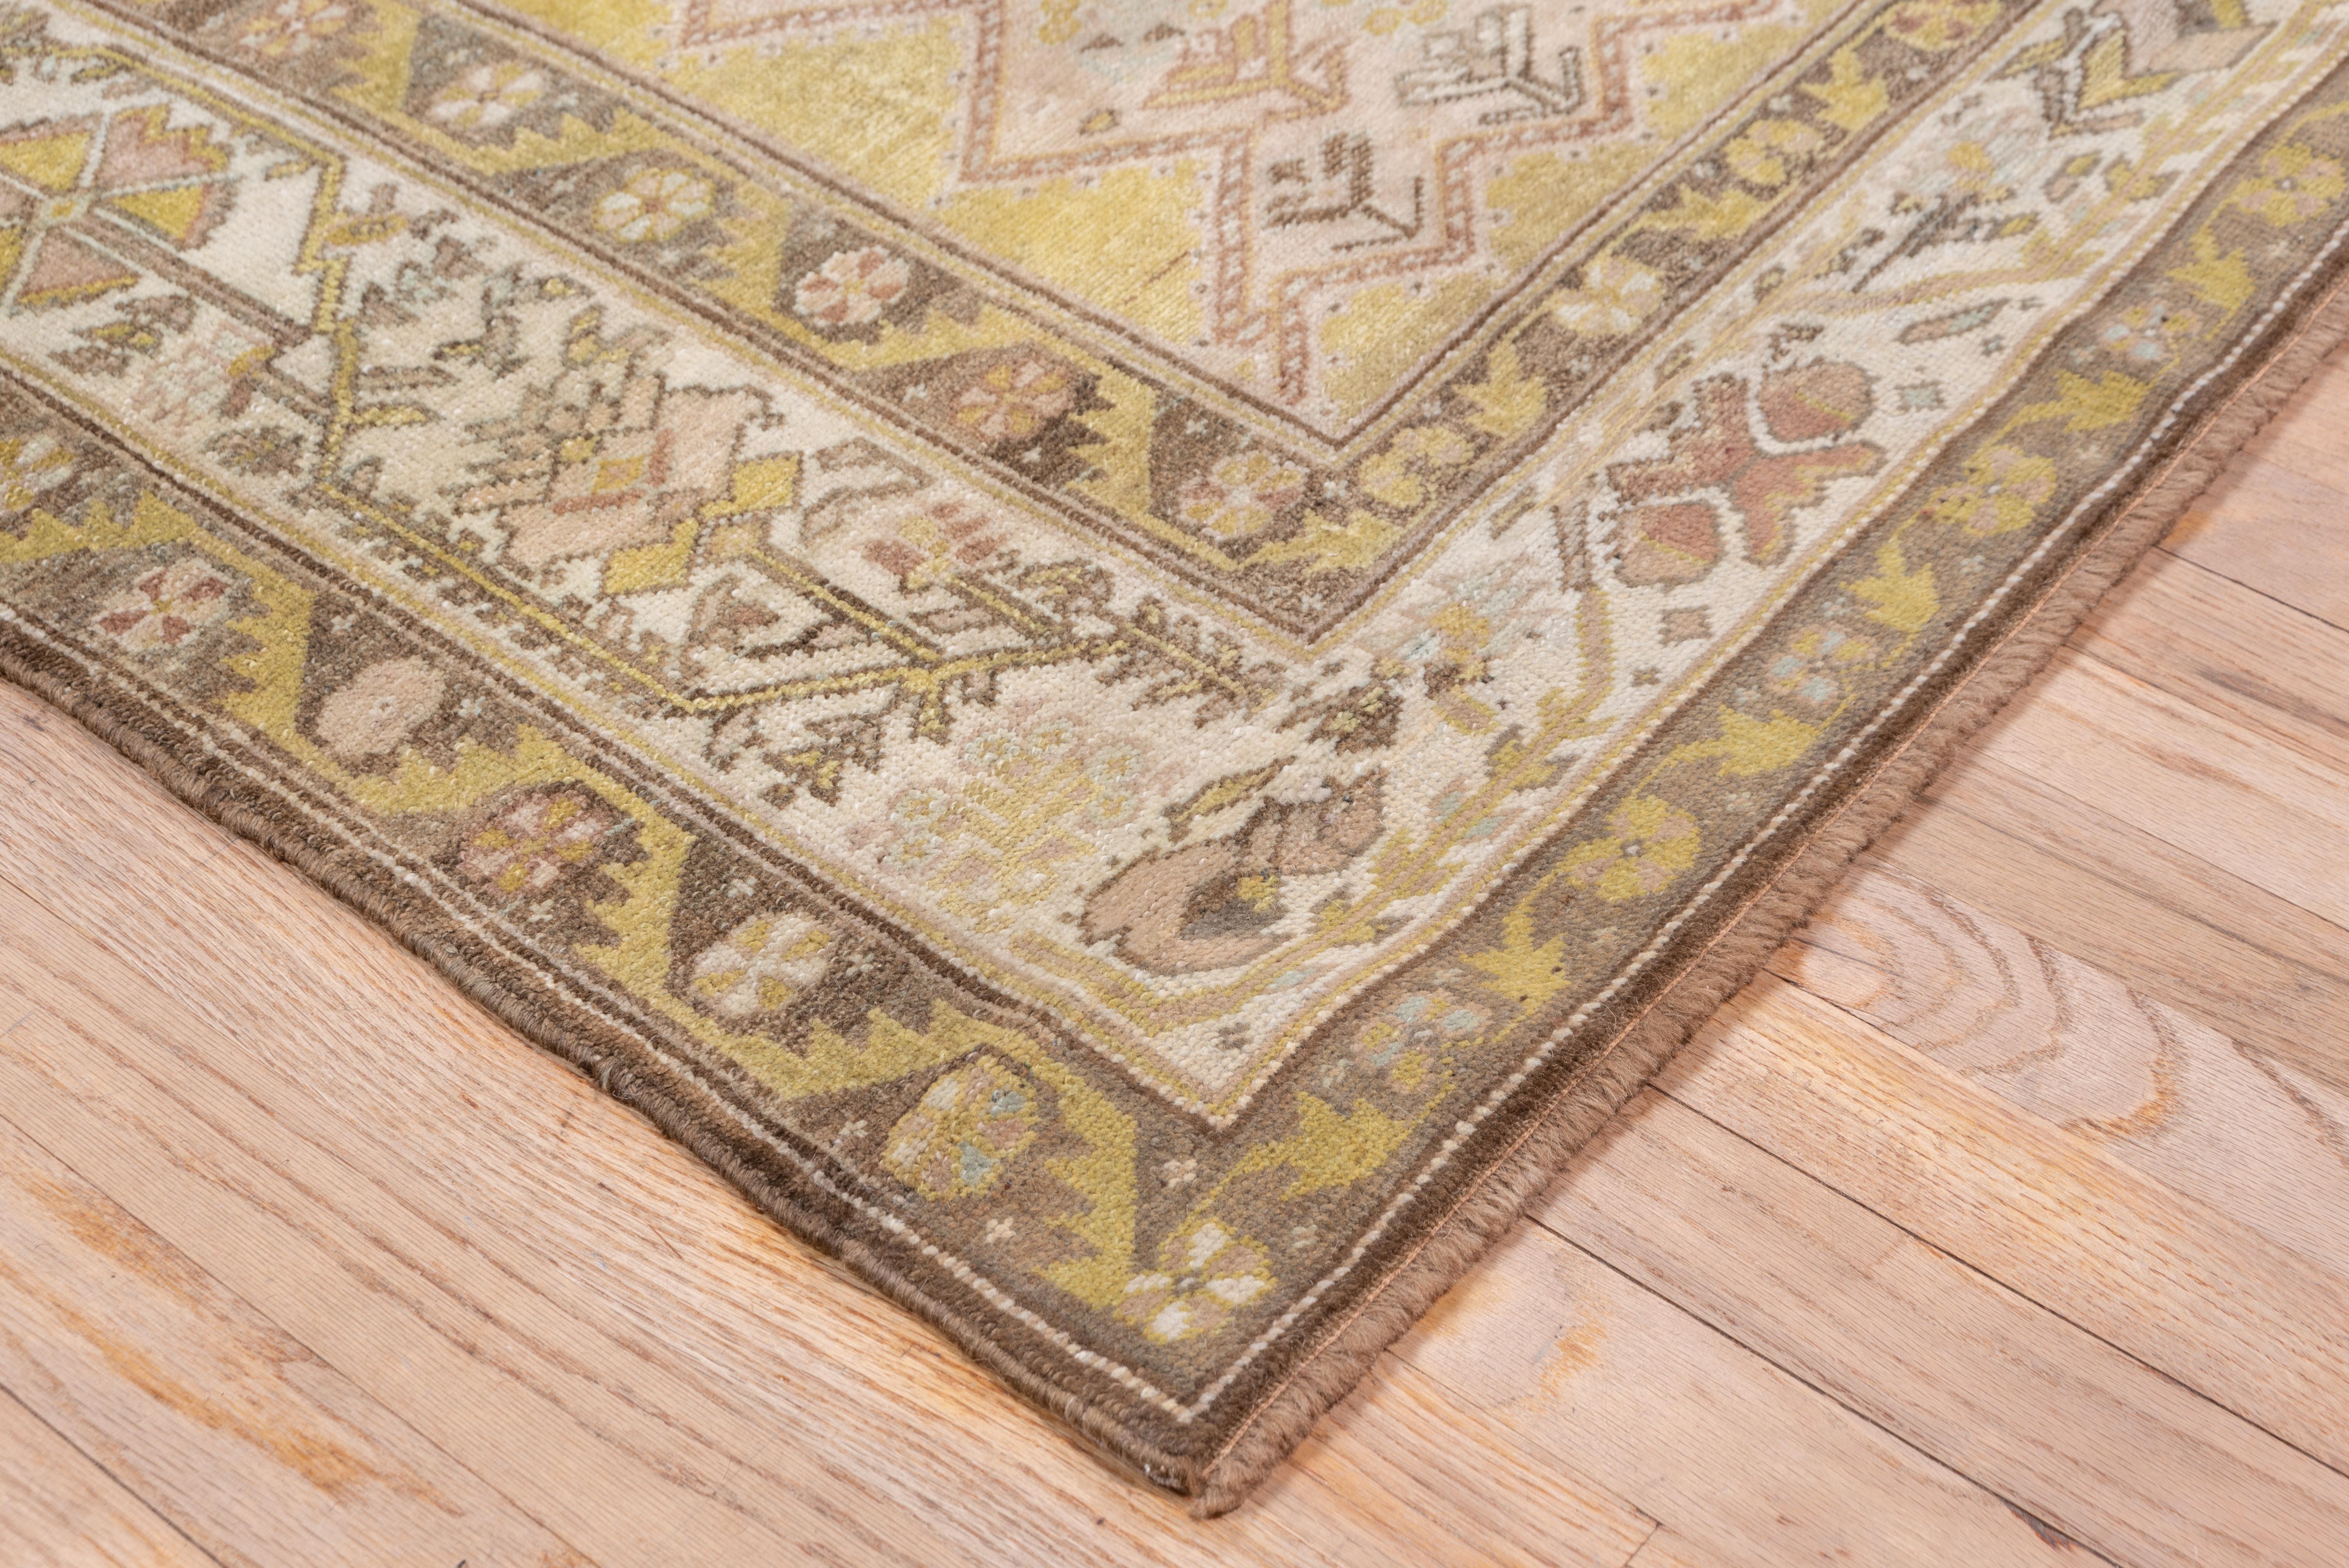 Tribal Unique Antique Northwest Persian Gallery Rug, Lime Green Boxed Floral Field For Sale